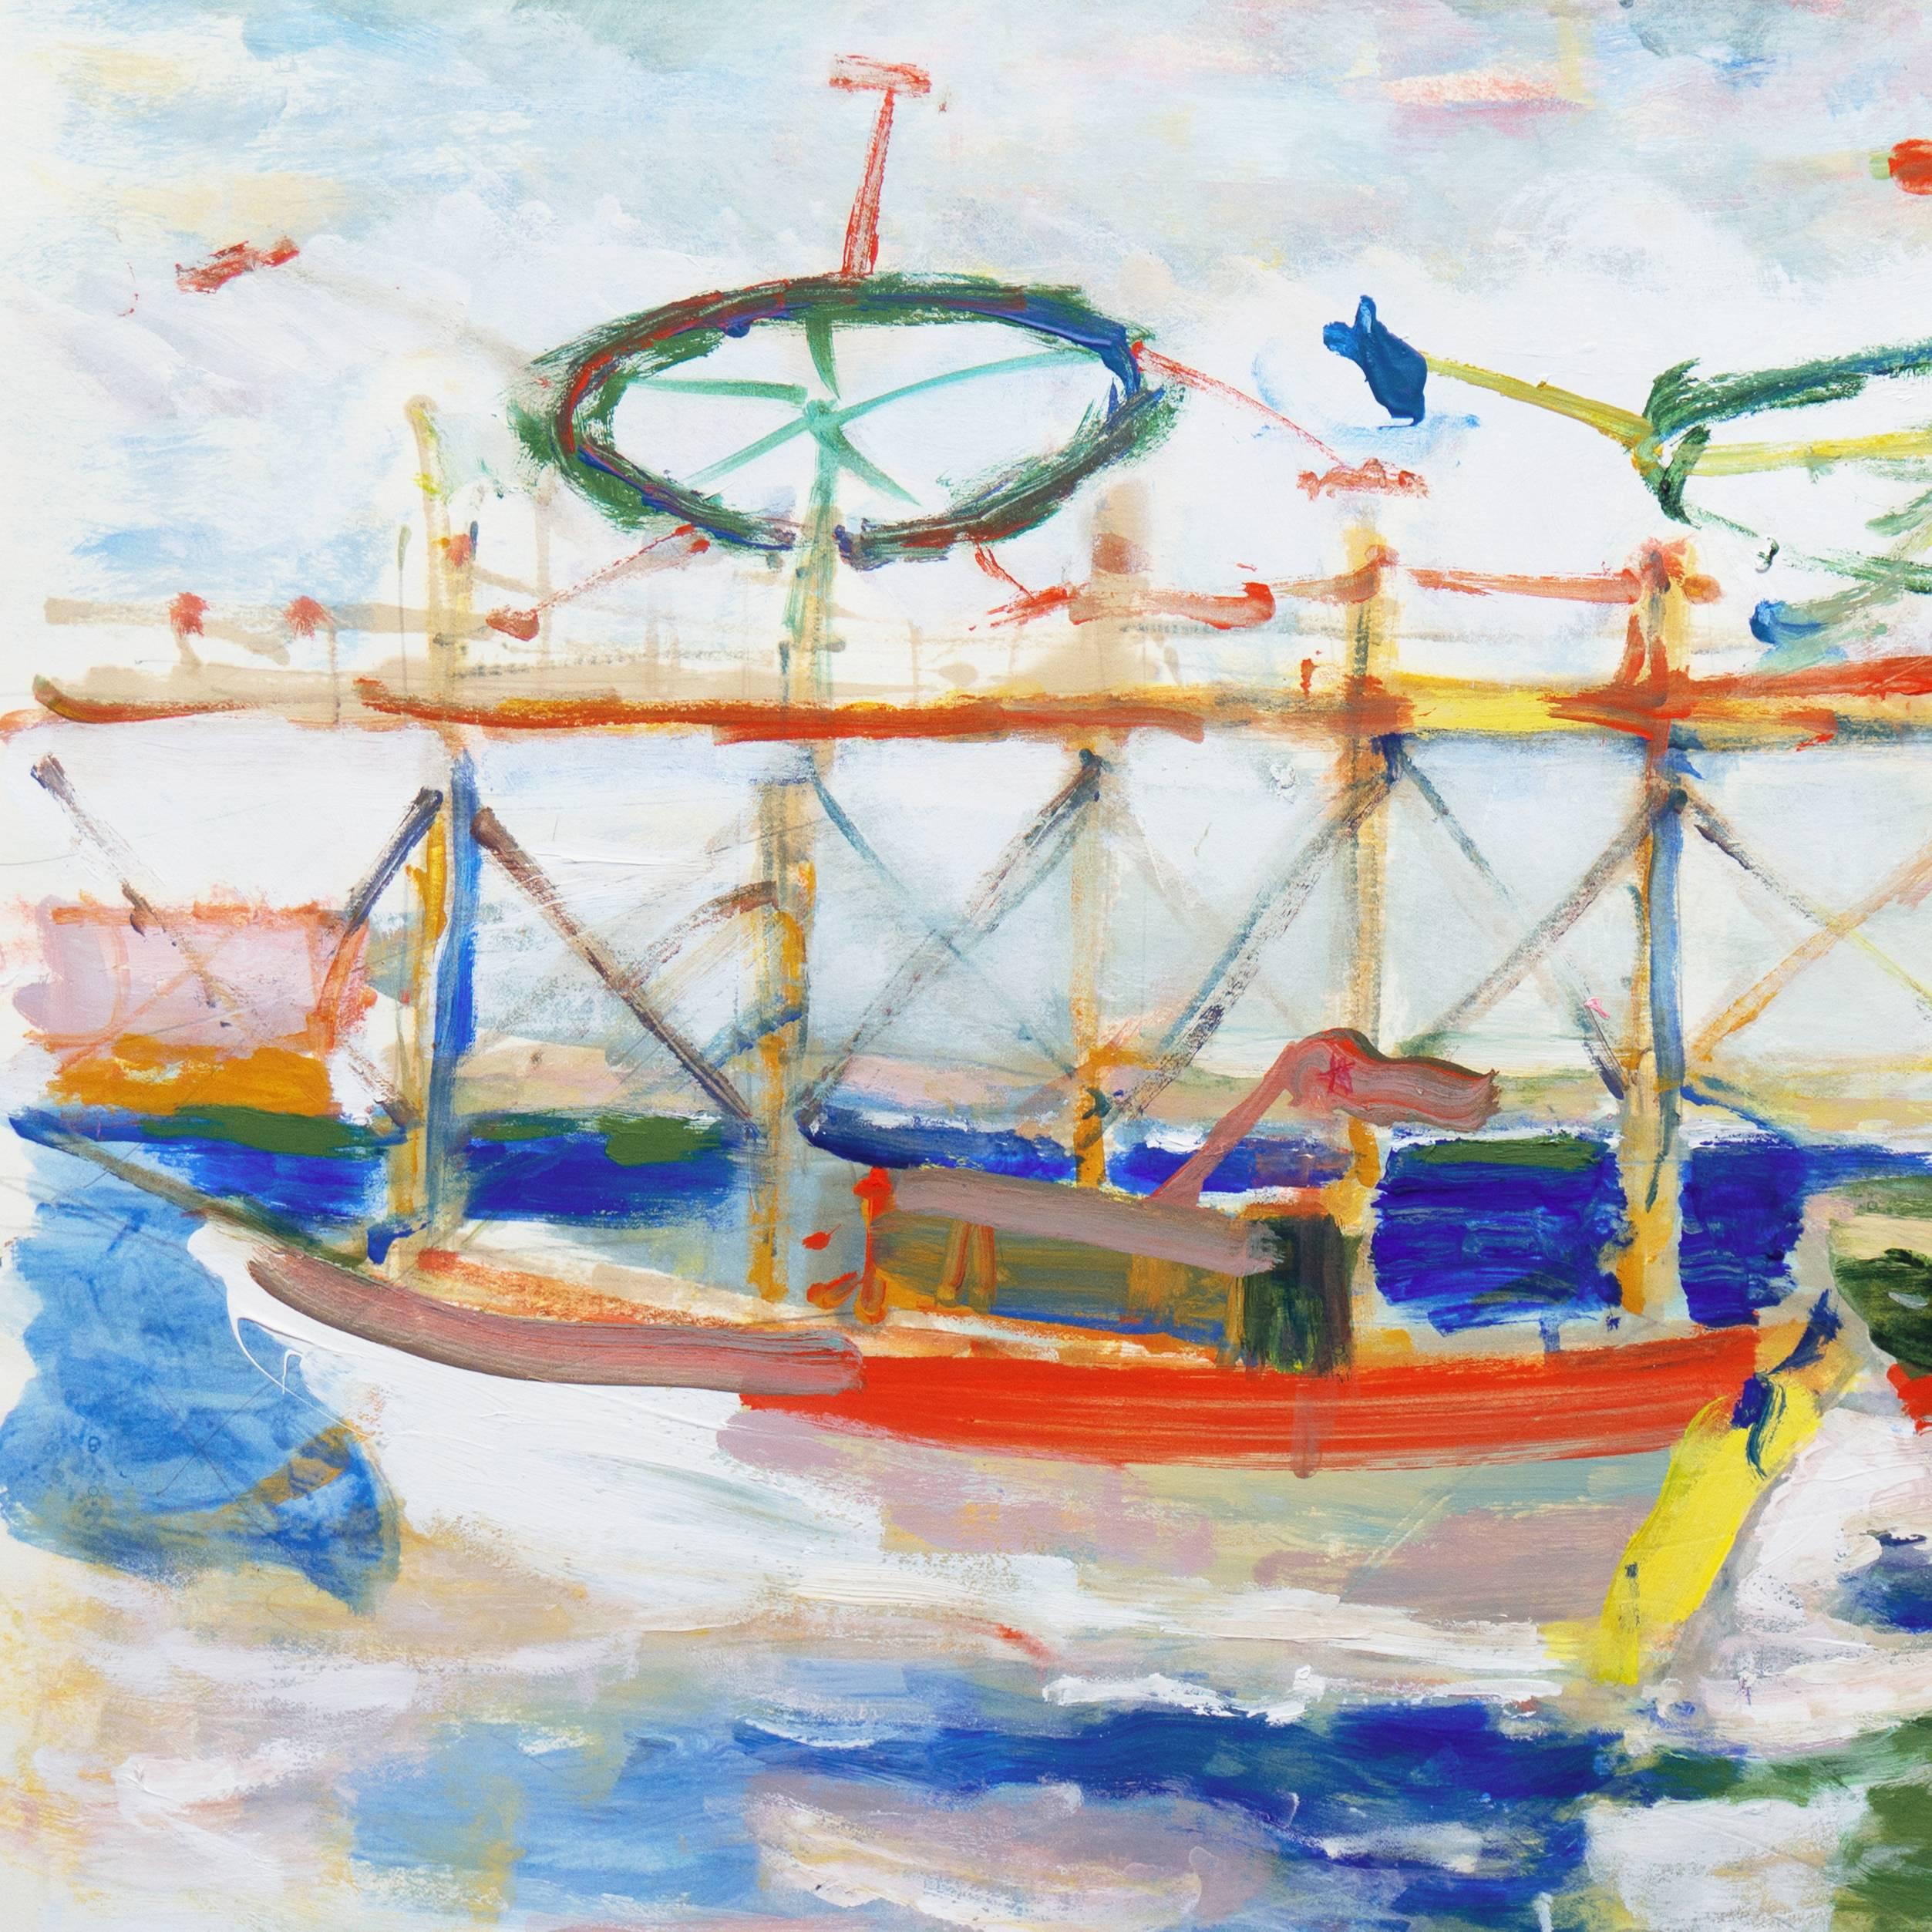 'Boardwalk Boats', California Expressionist Oil, Monterey, Stanford, Carmel  - Painting by Robert Canete